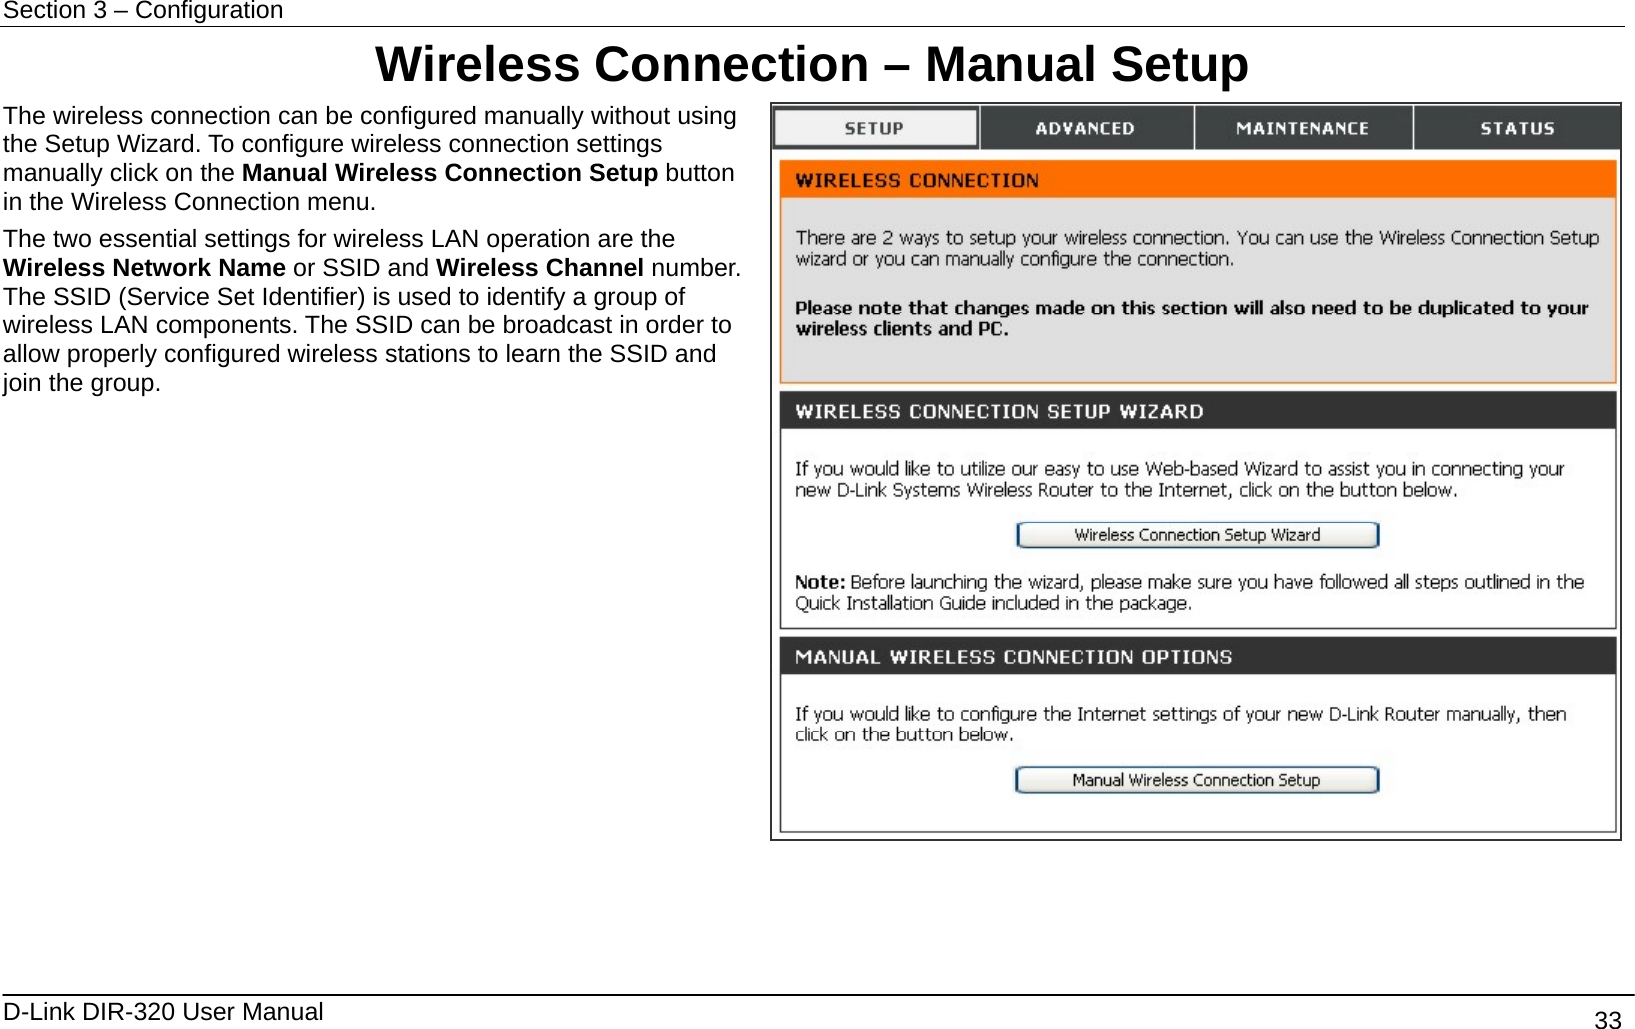 Section 3 – Configuration   D-Link DIR-320 User Manual                                       33 Wireless Connection – Manual Setup The wireless connection can be configured manually without using the Setup Wizard. To configure wireless connection settings manually click on the Manual Wireless Connection Setup button in the Wireless Connection menu. The two essential settings for wireless LAN operation are the Wireless Network Name or SSID and Wireless Channel number. The SSID (Service Set Identifier) is used to identify a group of wireless LAN components. The SSID can be broadcast in order to allow properly configured wireless stations to learn the SSID and join the group.  